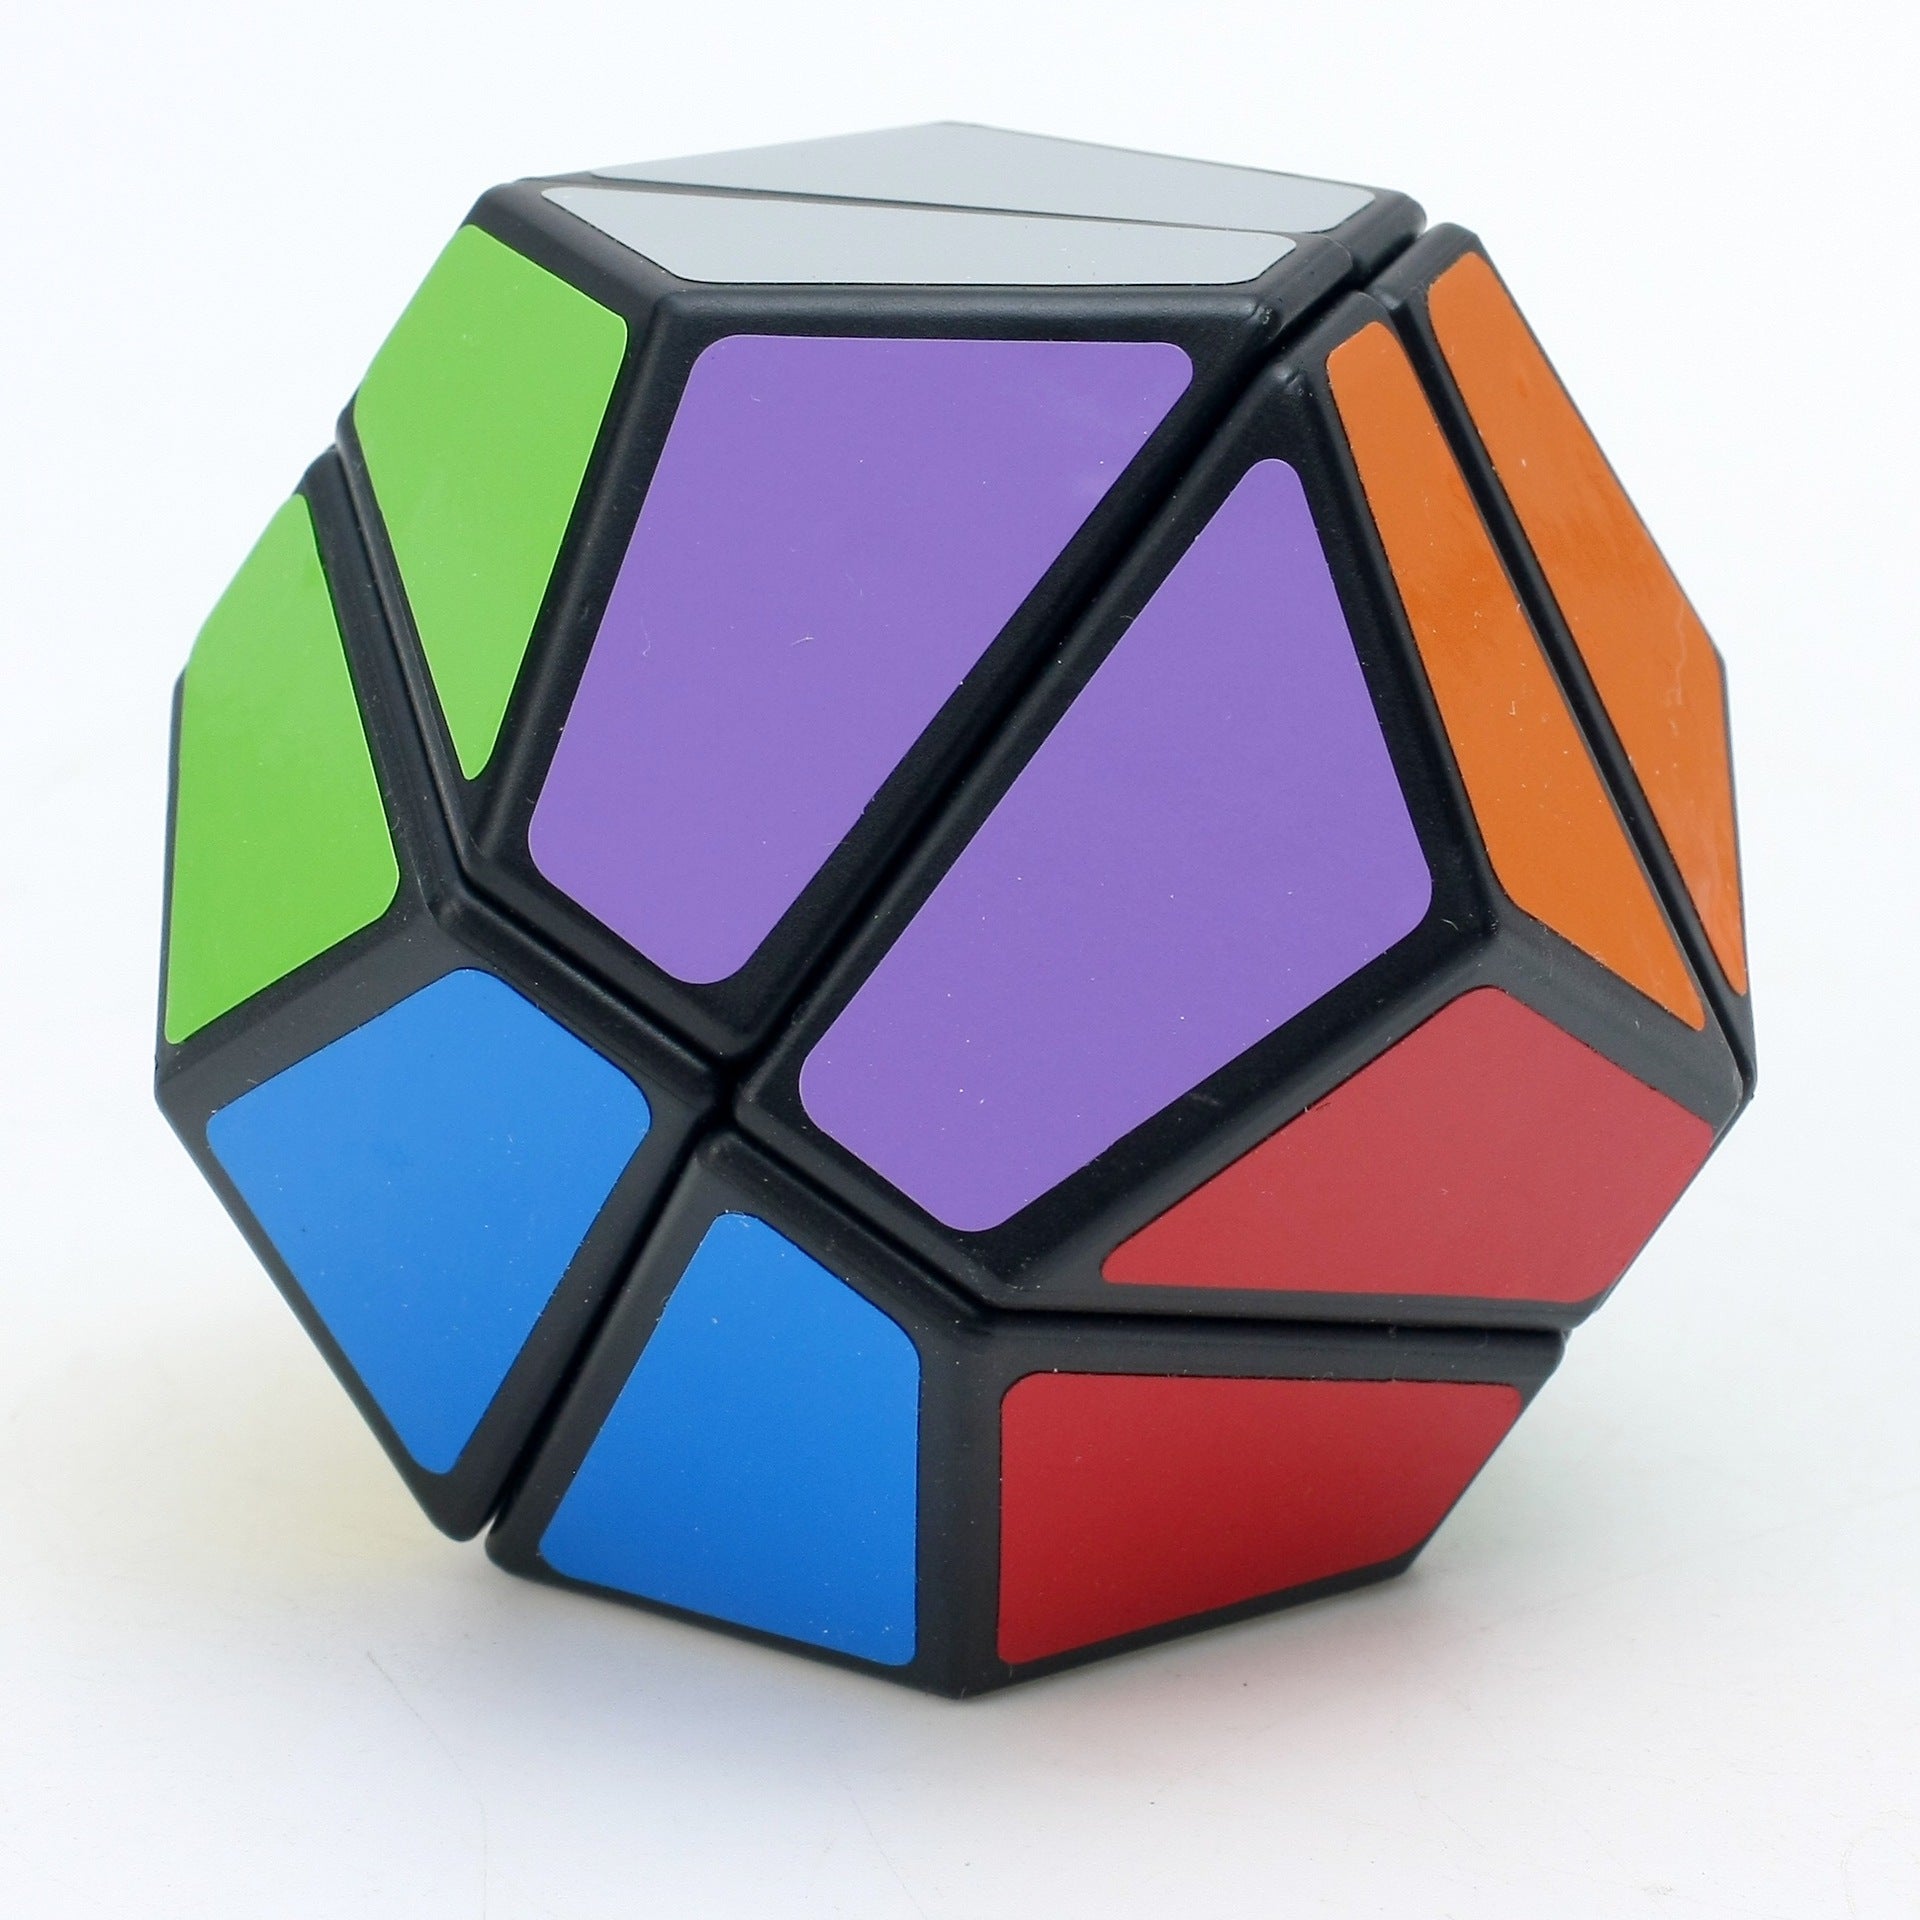 Dodecahedron shaped cube toys